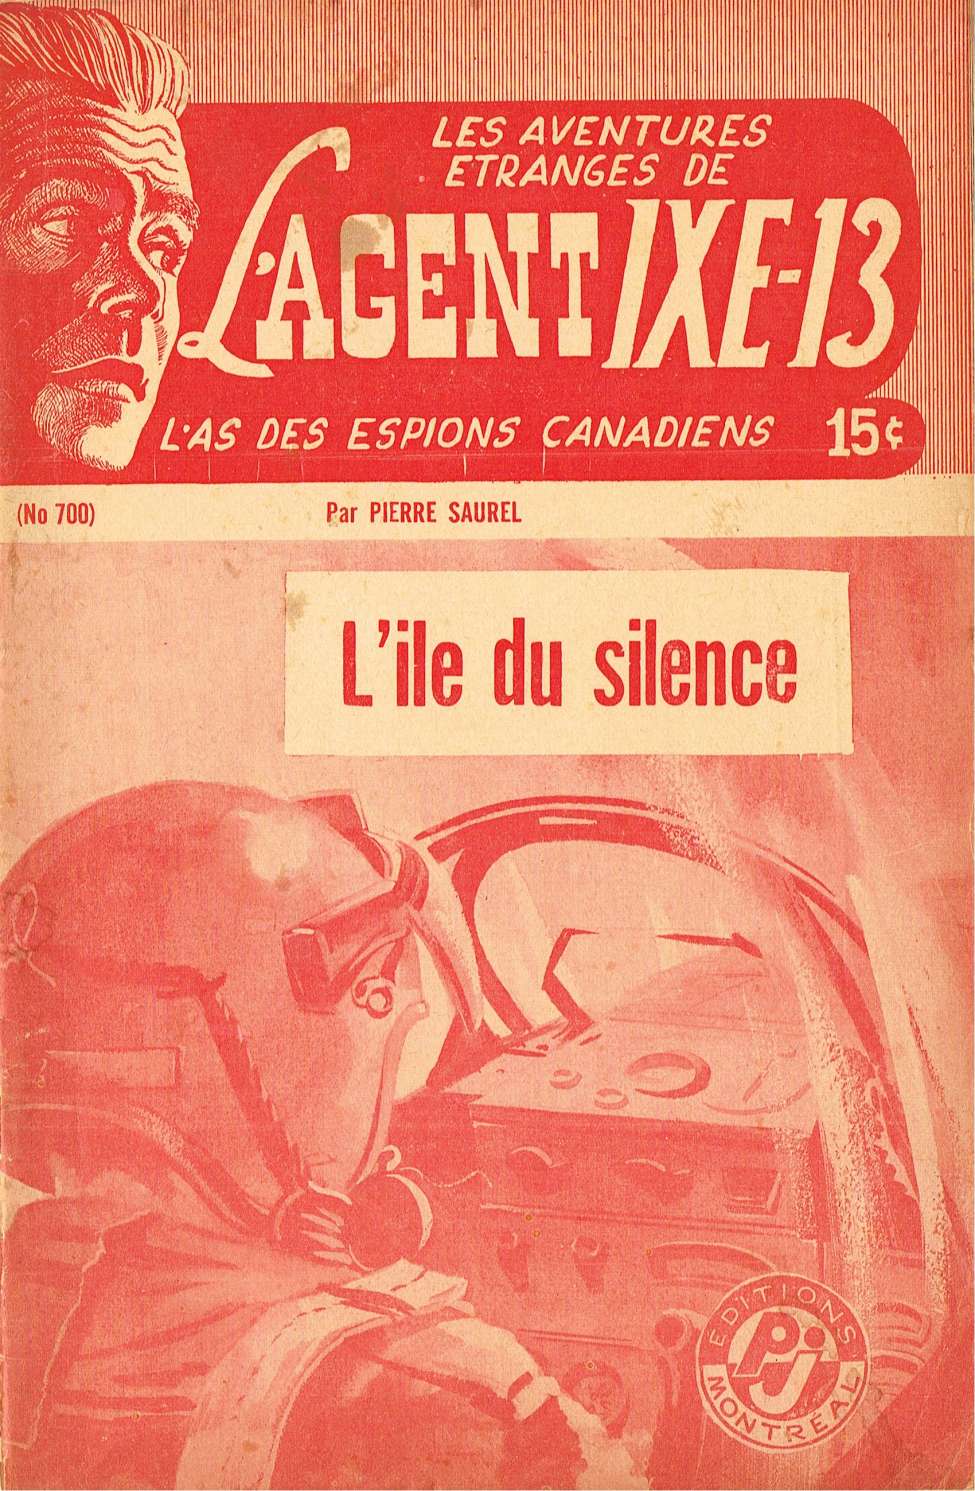 Book Cover For L'Agent IXE-13 v2 700 - L'île du silence